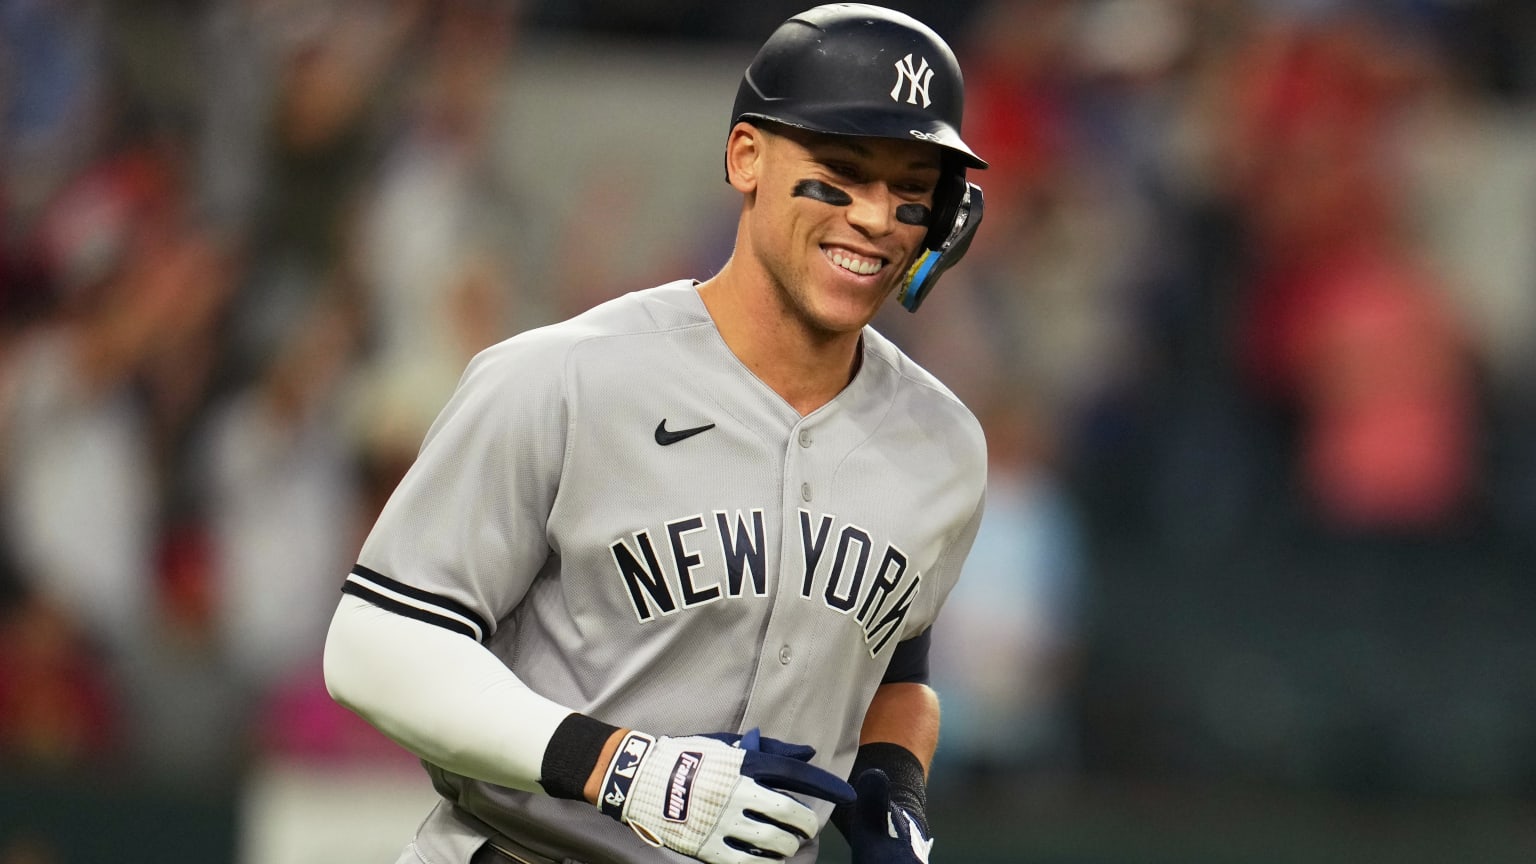 Aaron Judge smiles while running the bases